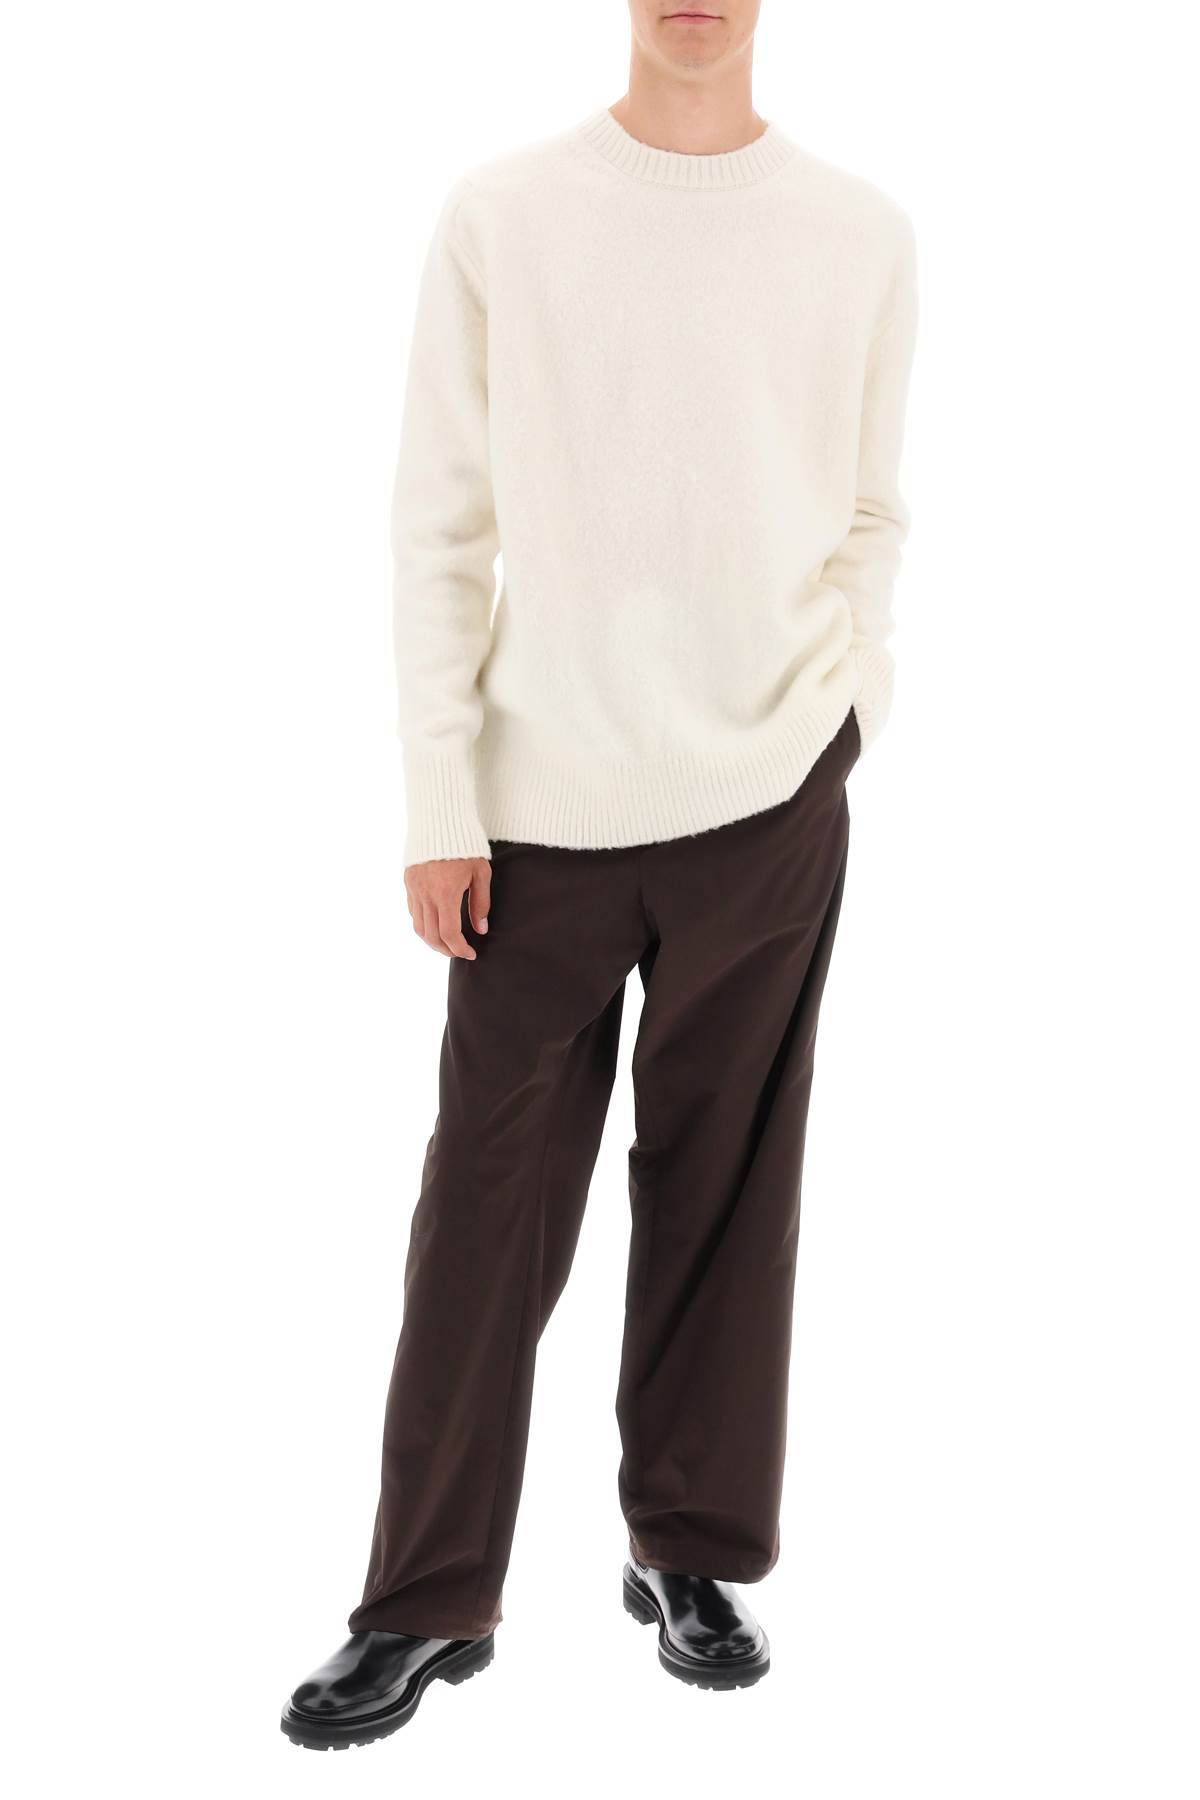 Shop Oamc 'dome' Straight Cut Pants In Brown